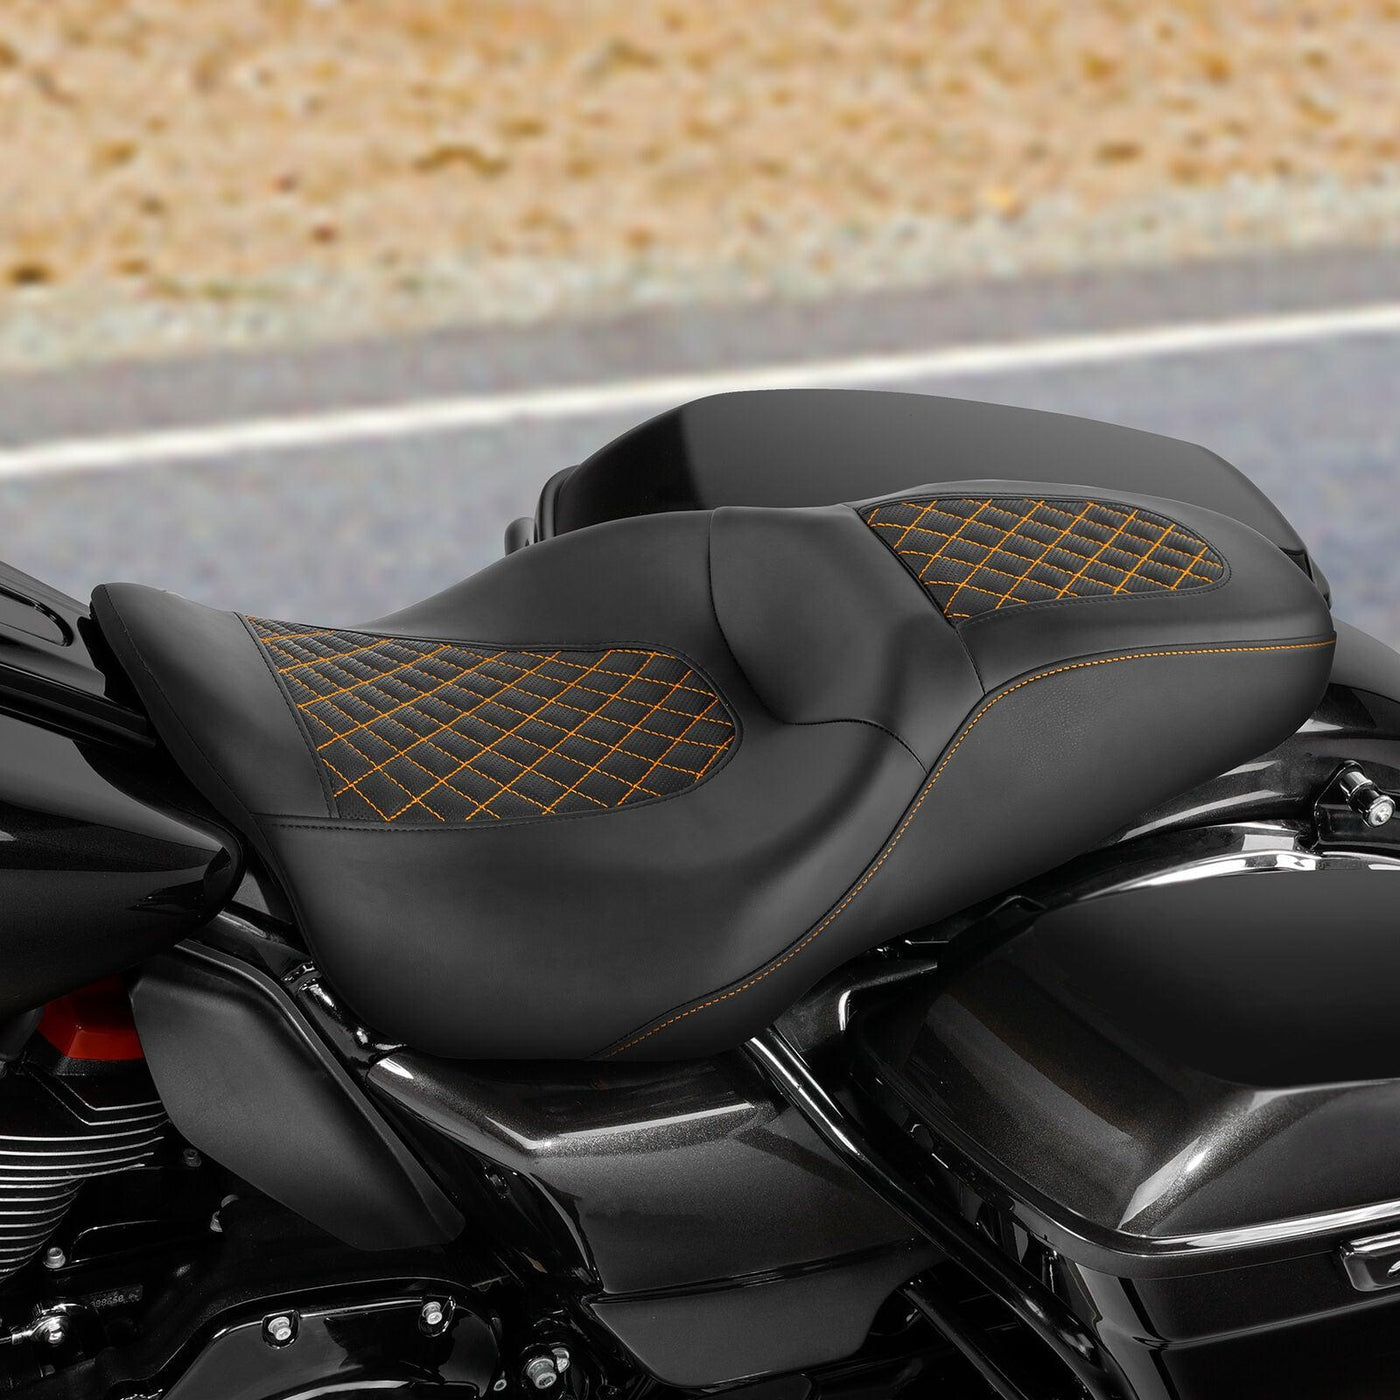 Black Two Up Driver Passenger Seat Fit For Harley Touring Street Glide 2009-2021 - Moto Life Products